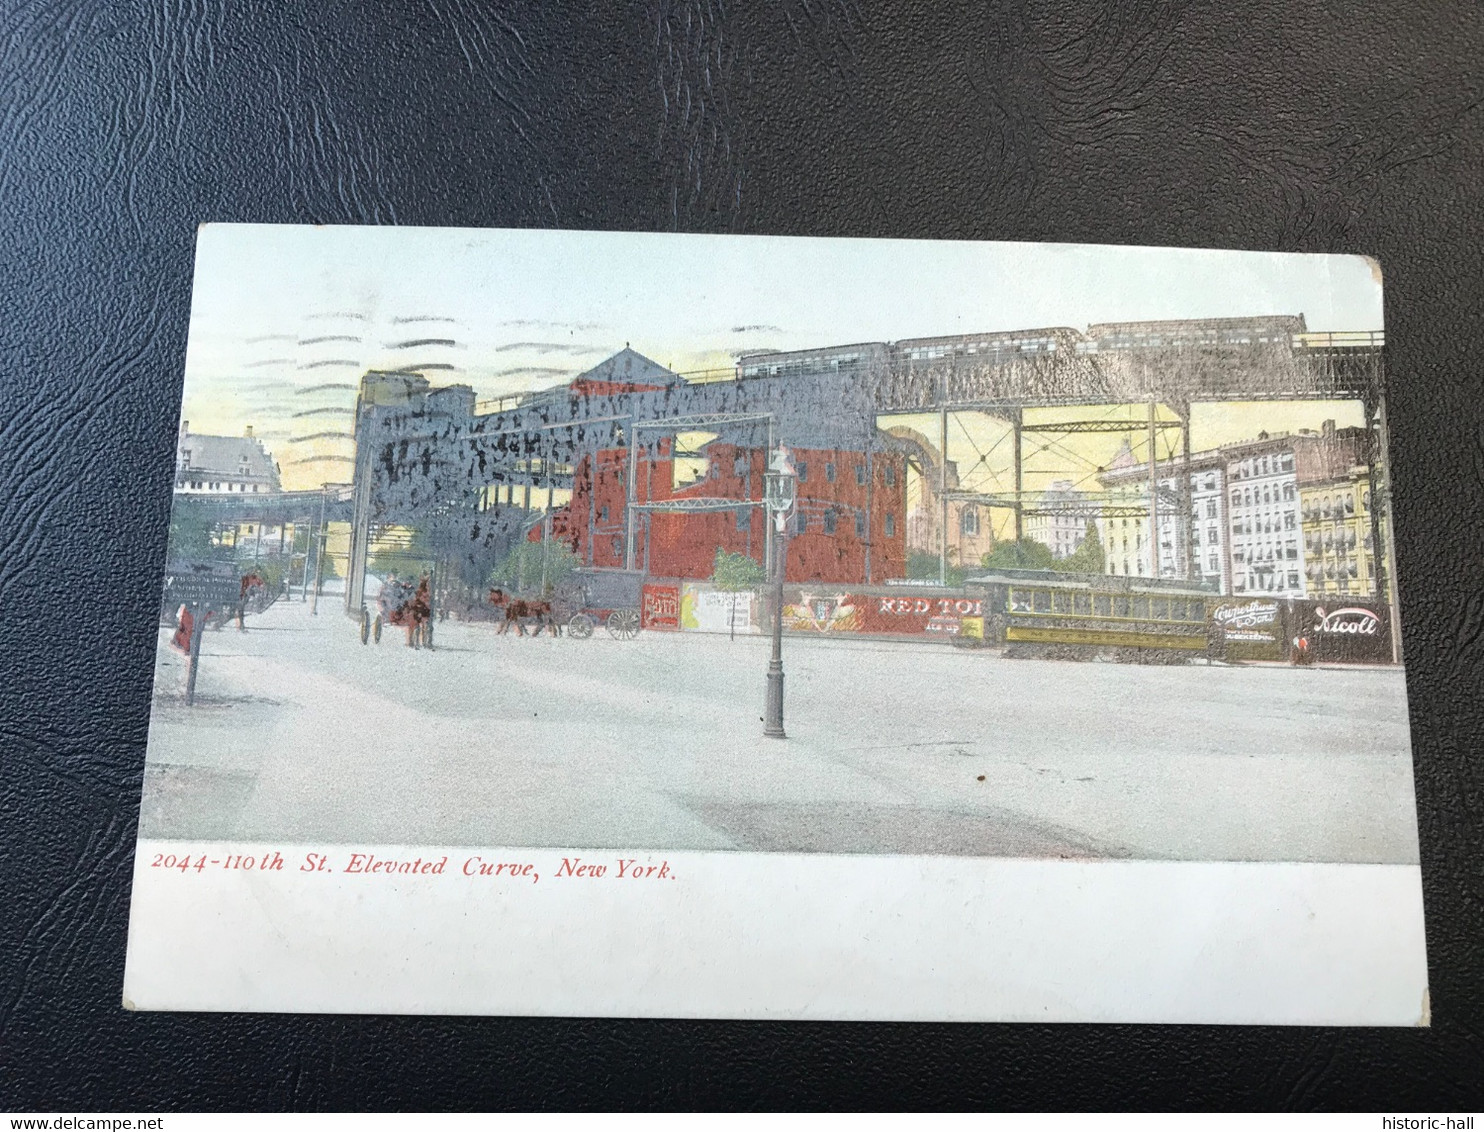 2044 - 110th  St. Elevated Curve, New York - 1906 - Transportes